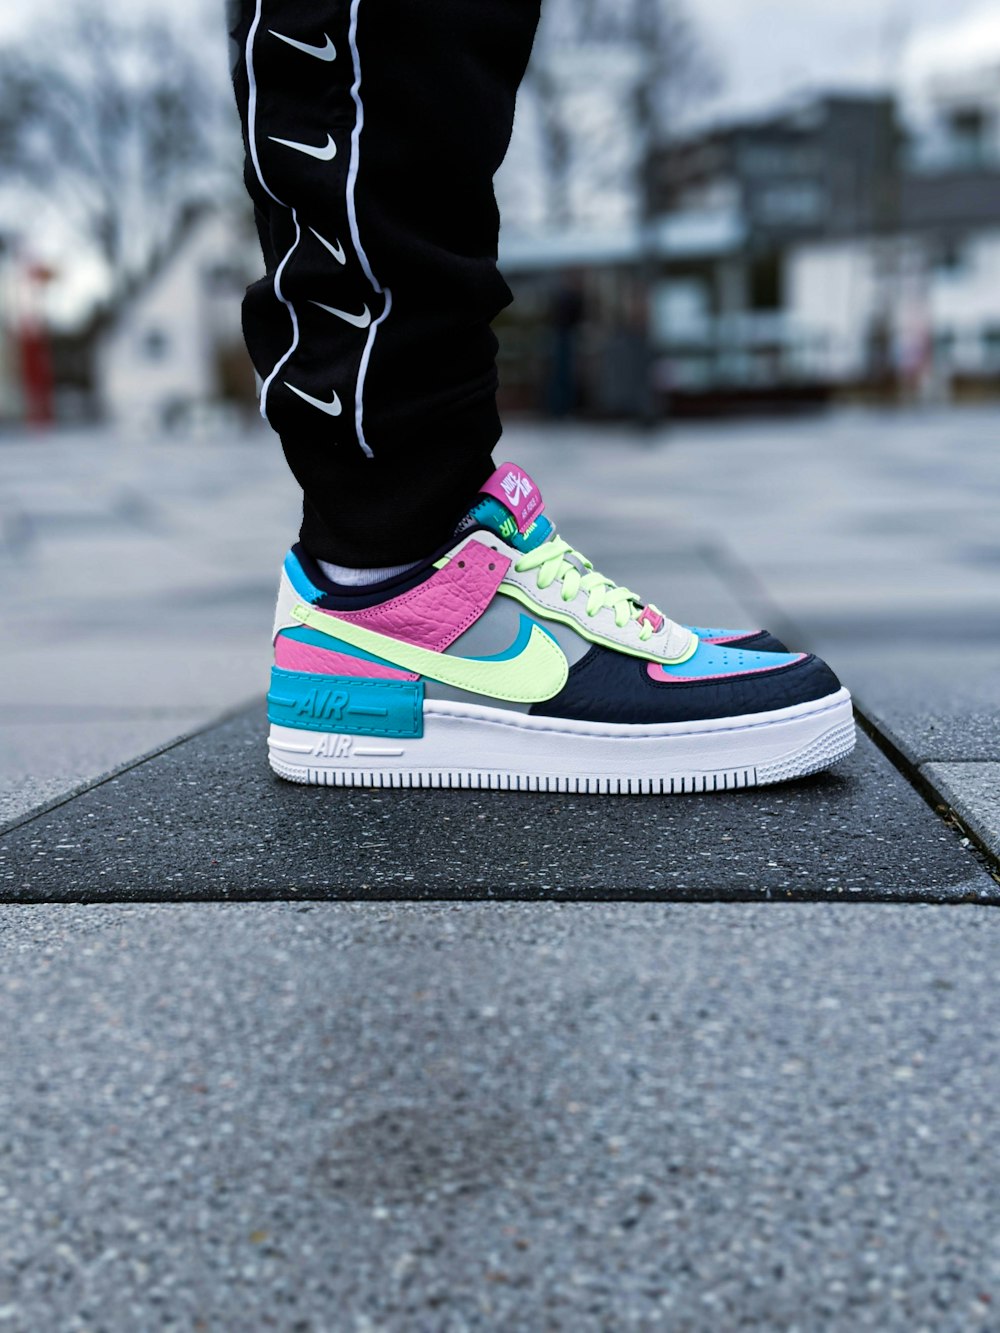 Nike Air Force 1 Pictures | Download Free Images on Unsplash